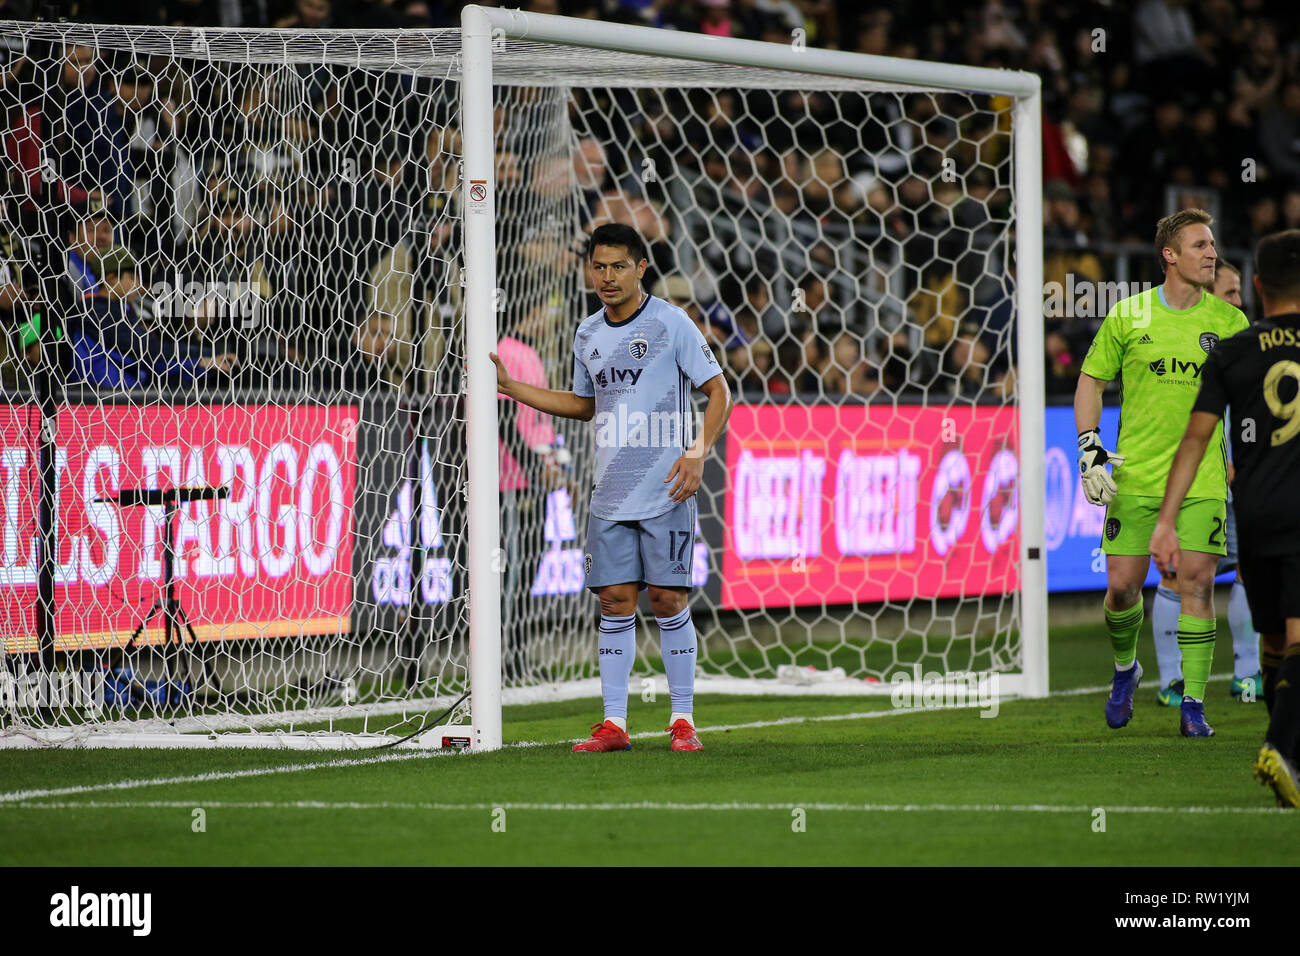 Los Angeles, CA, USA. 03rd Mar, 2019. MLS 2019: Sporting Kansas City midfielder Roger Espinoza #17 guarding the post during the Los Angeles Football Club vs Sporting KC at BANC OF CALIFORNIA Stadium in Los Angeles, Ca on March 03, 2019. Photo by Jevone Moore Credit: csm/Alamy Live News Stock Photo